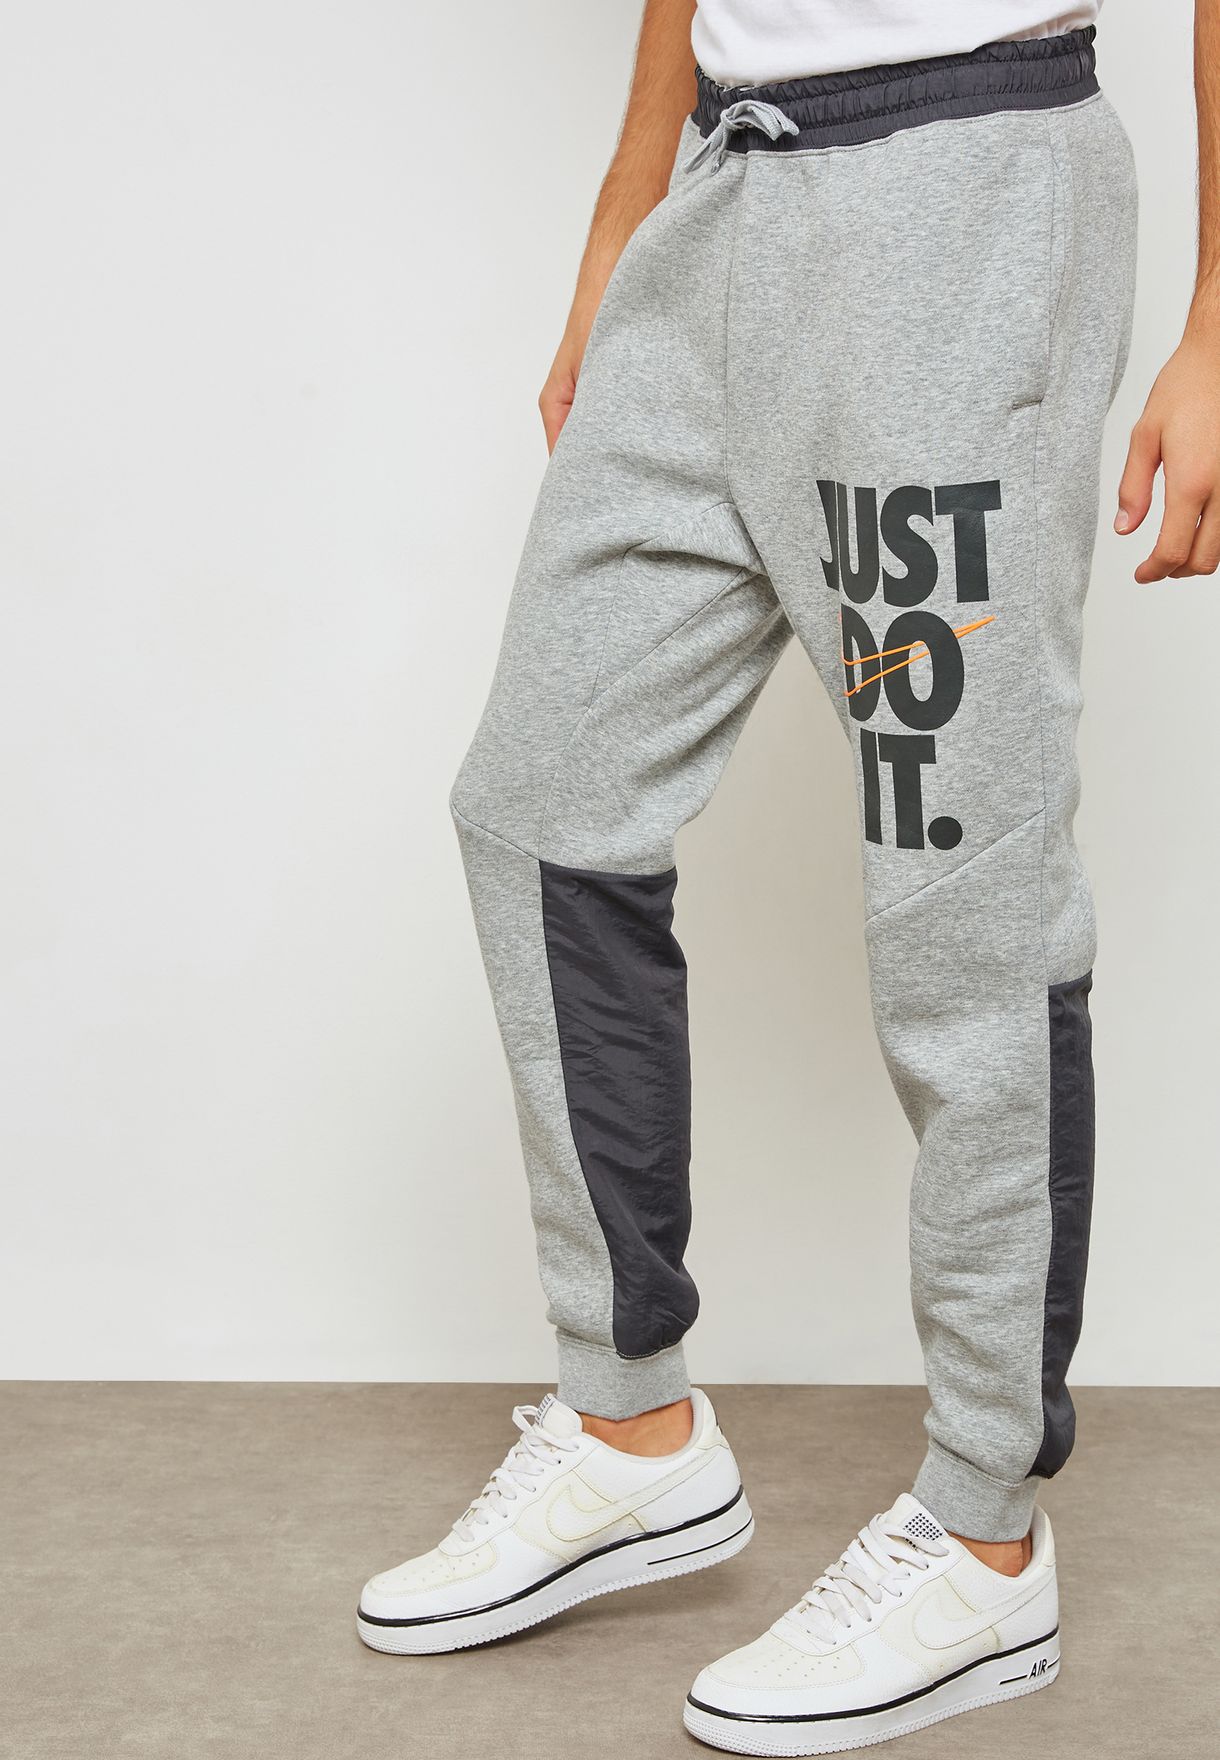 Buy Nike grey Just Do It Sweatpants for 